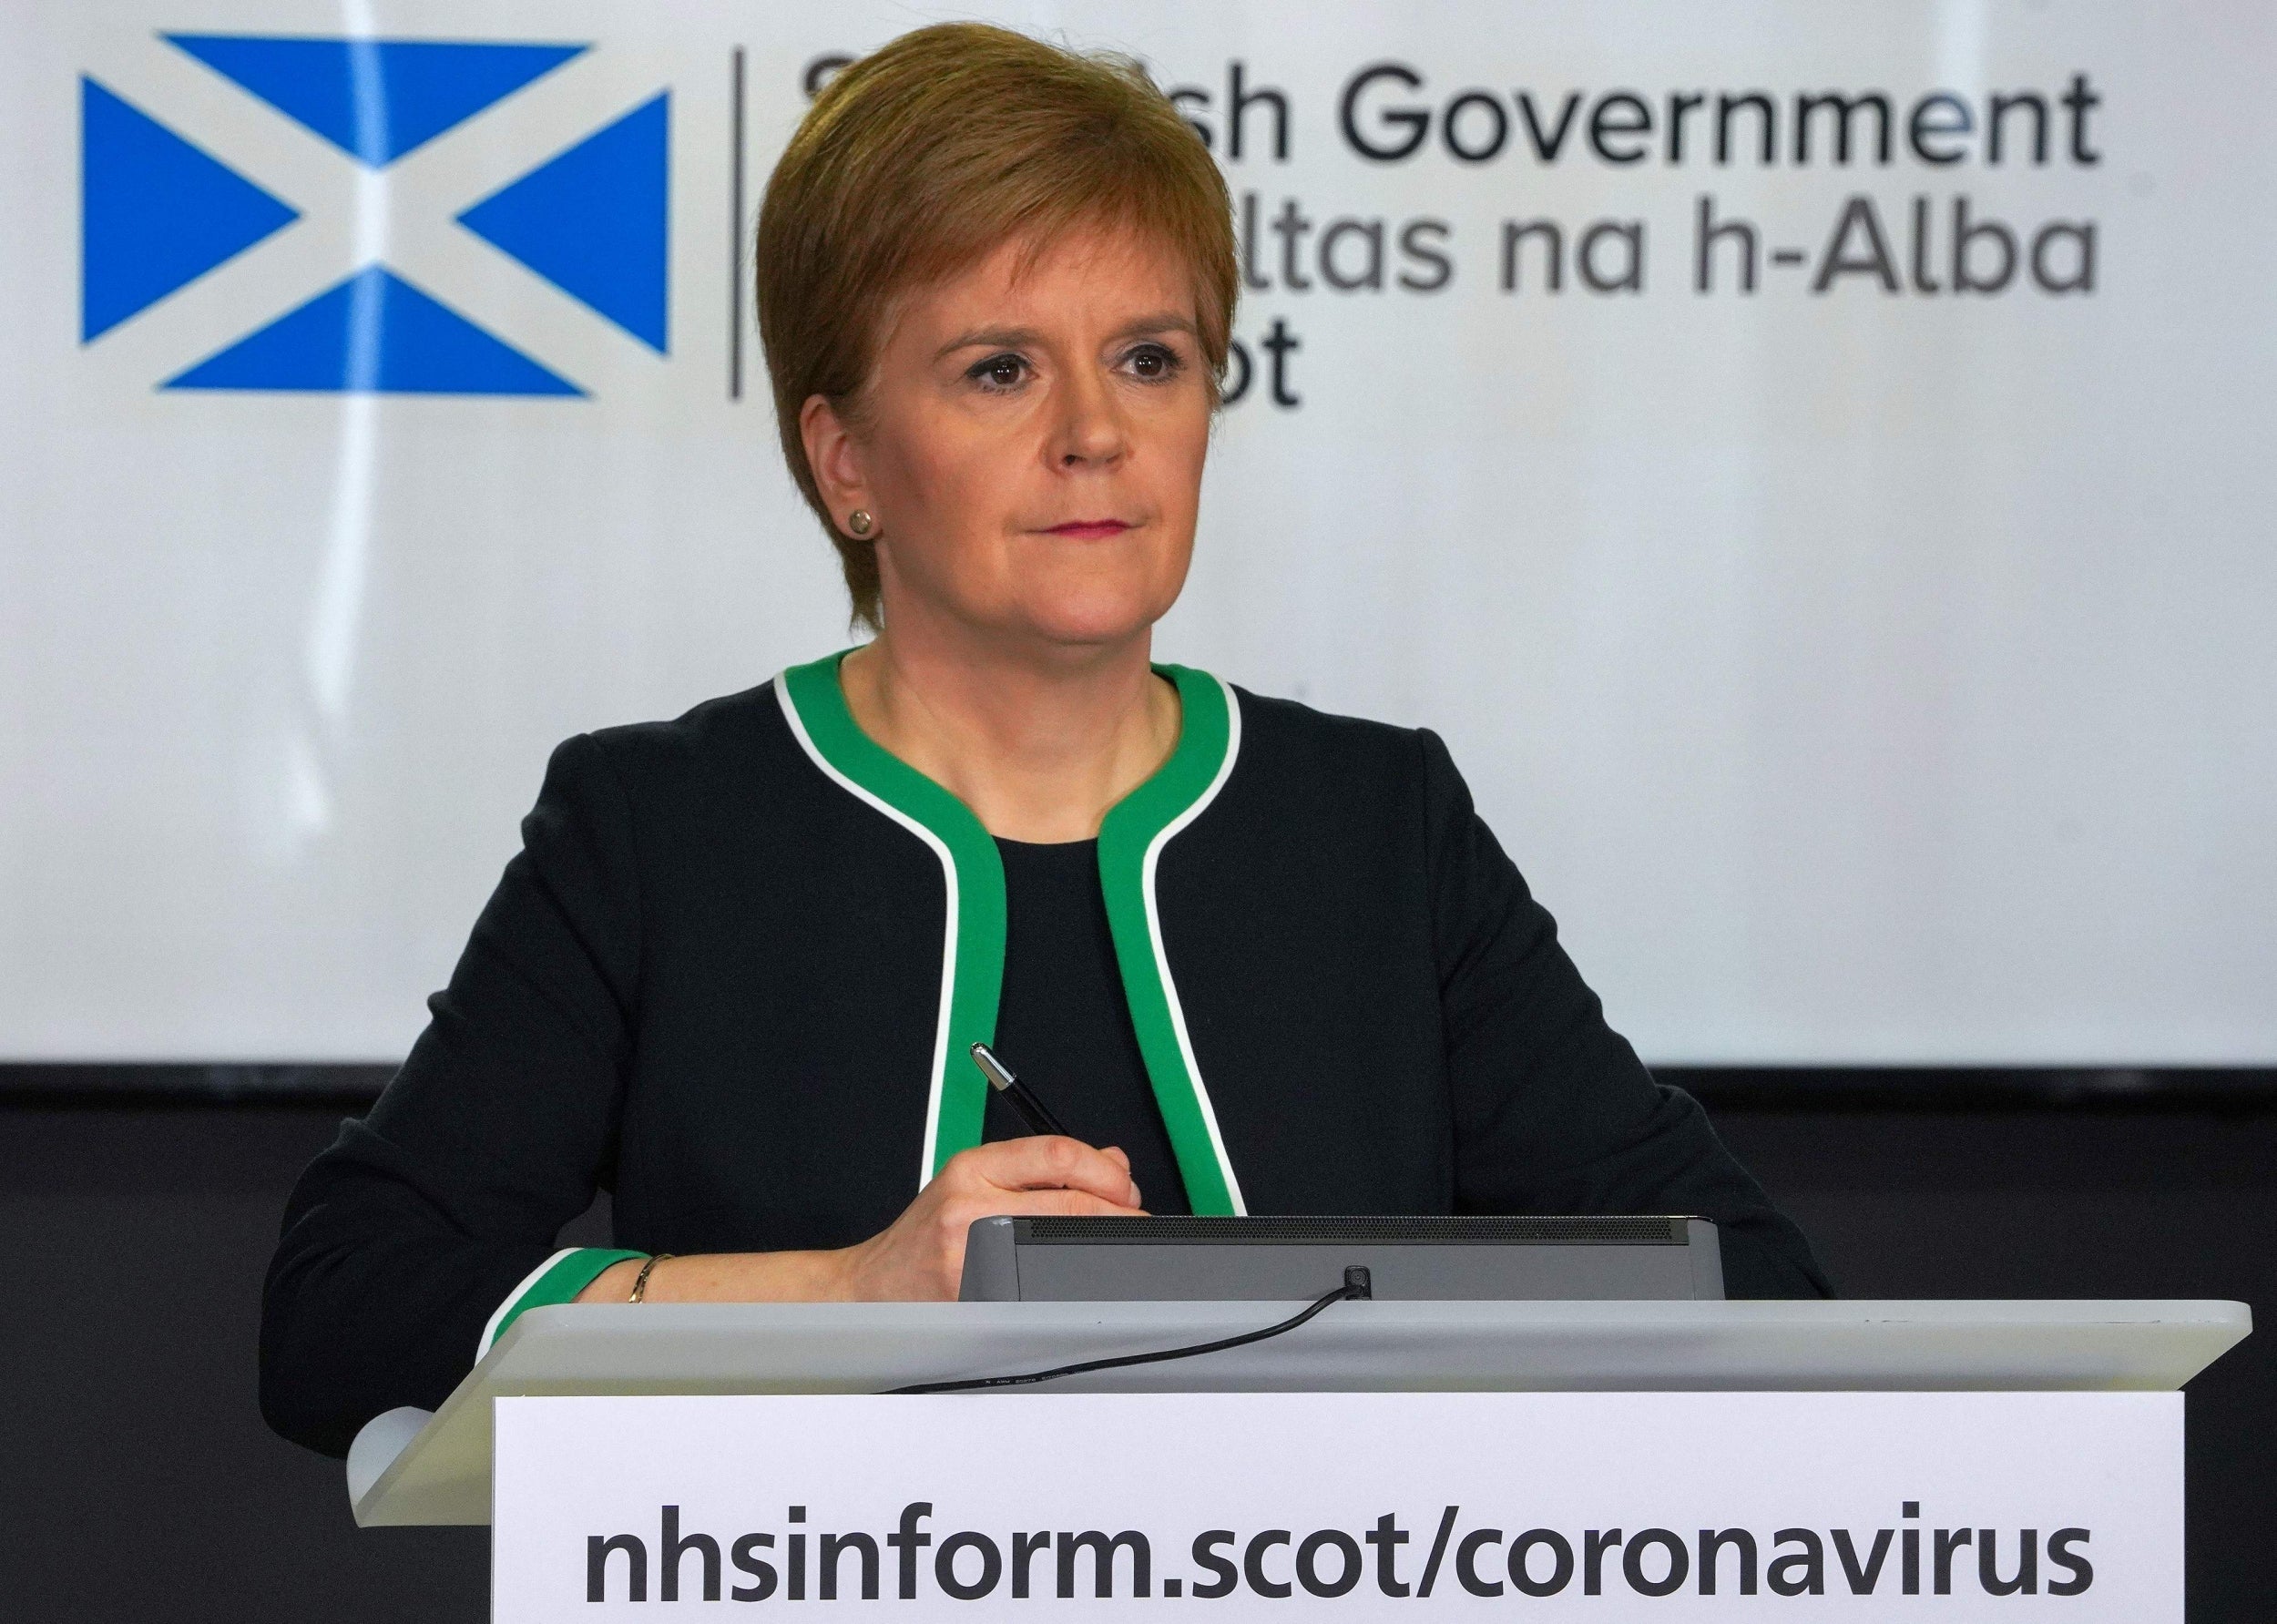 Scotland’s first minister said it would require the cooperation of the UK government as the Scottish parliament did not currently have the powers